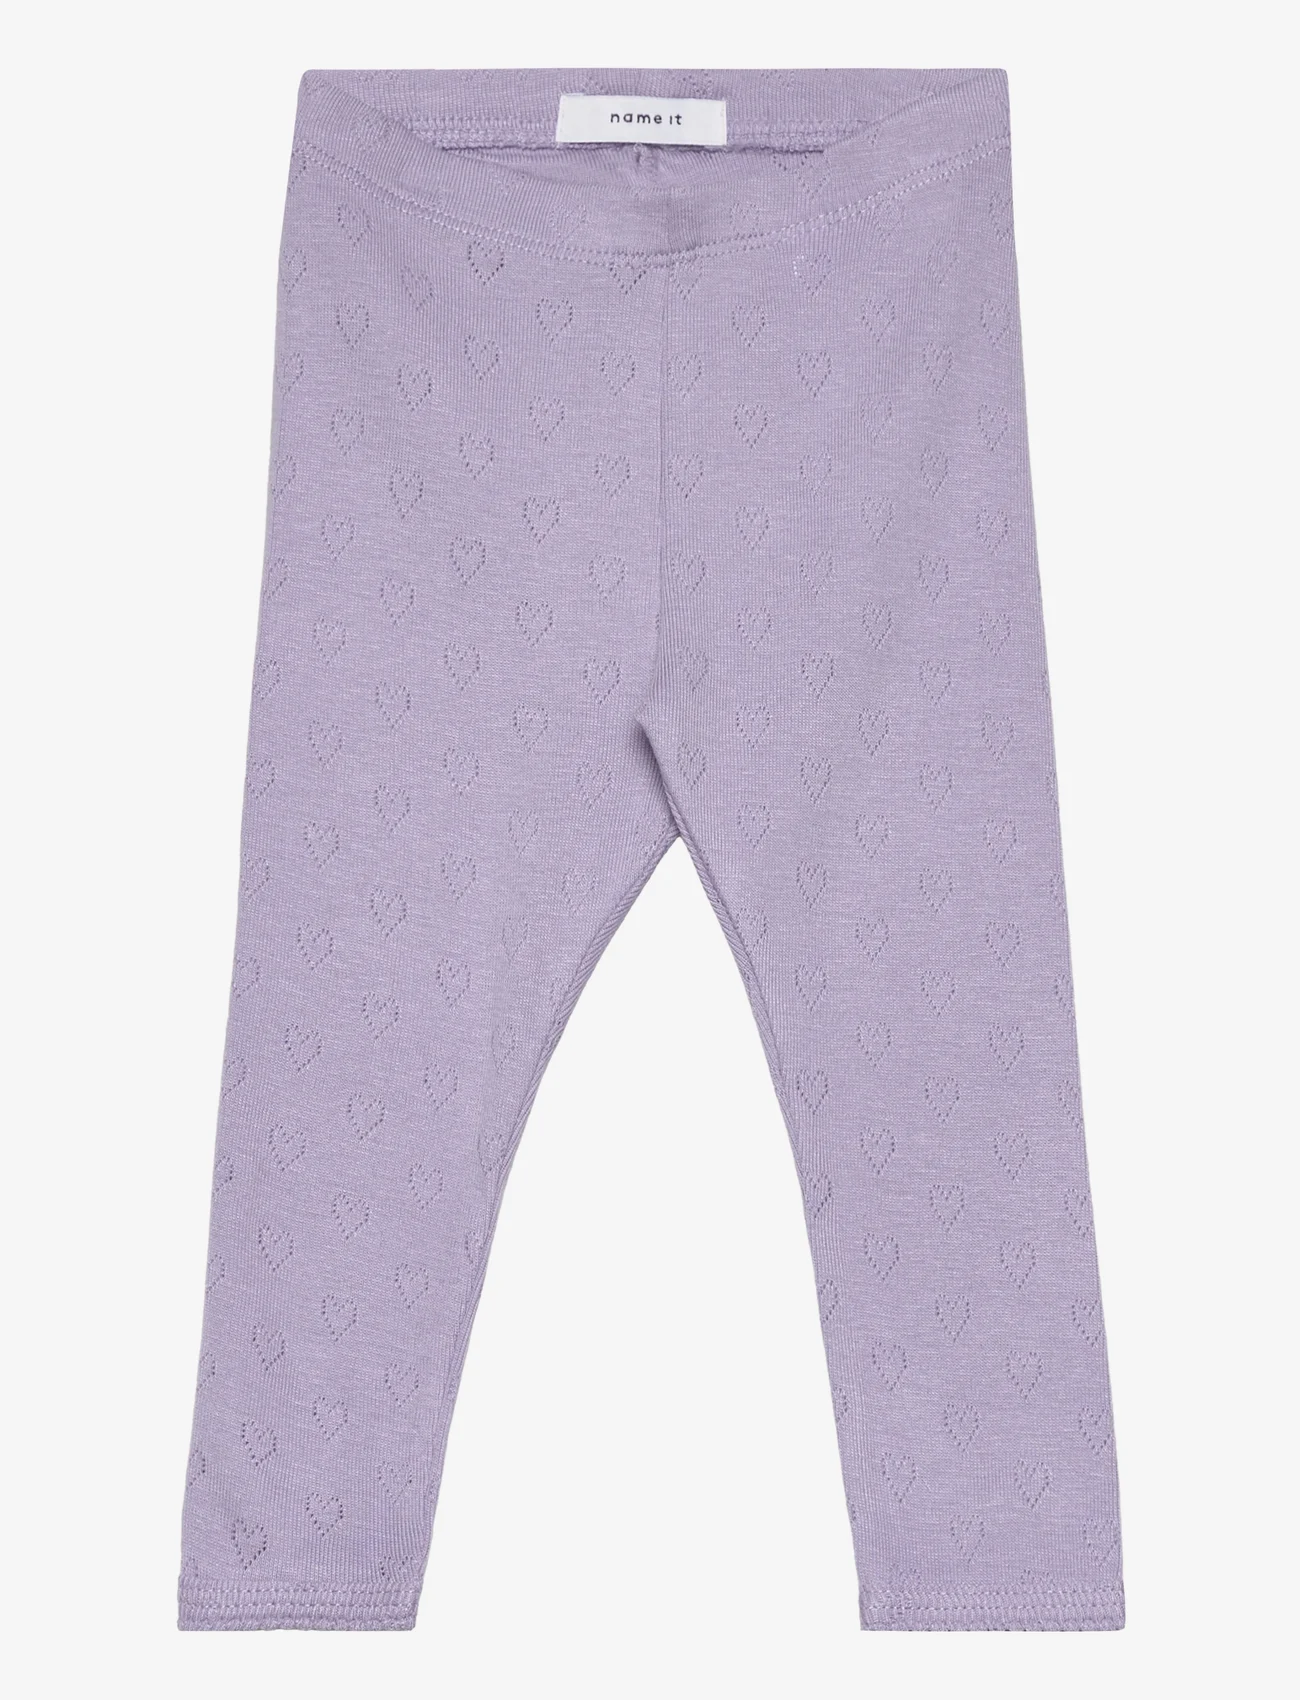 name it - NBFTYANE LEGGING - lowest prices - heirloom lilac - 0